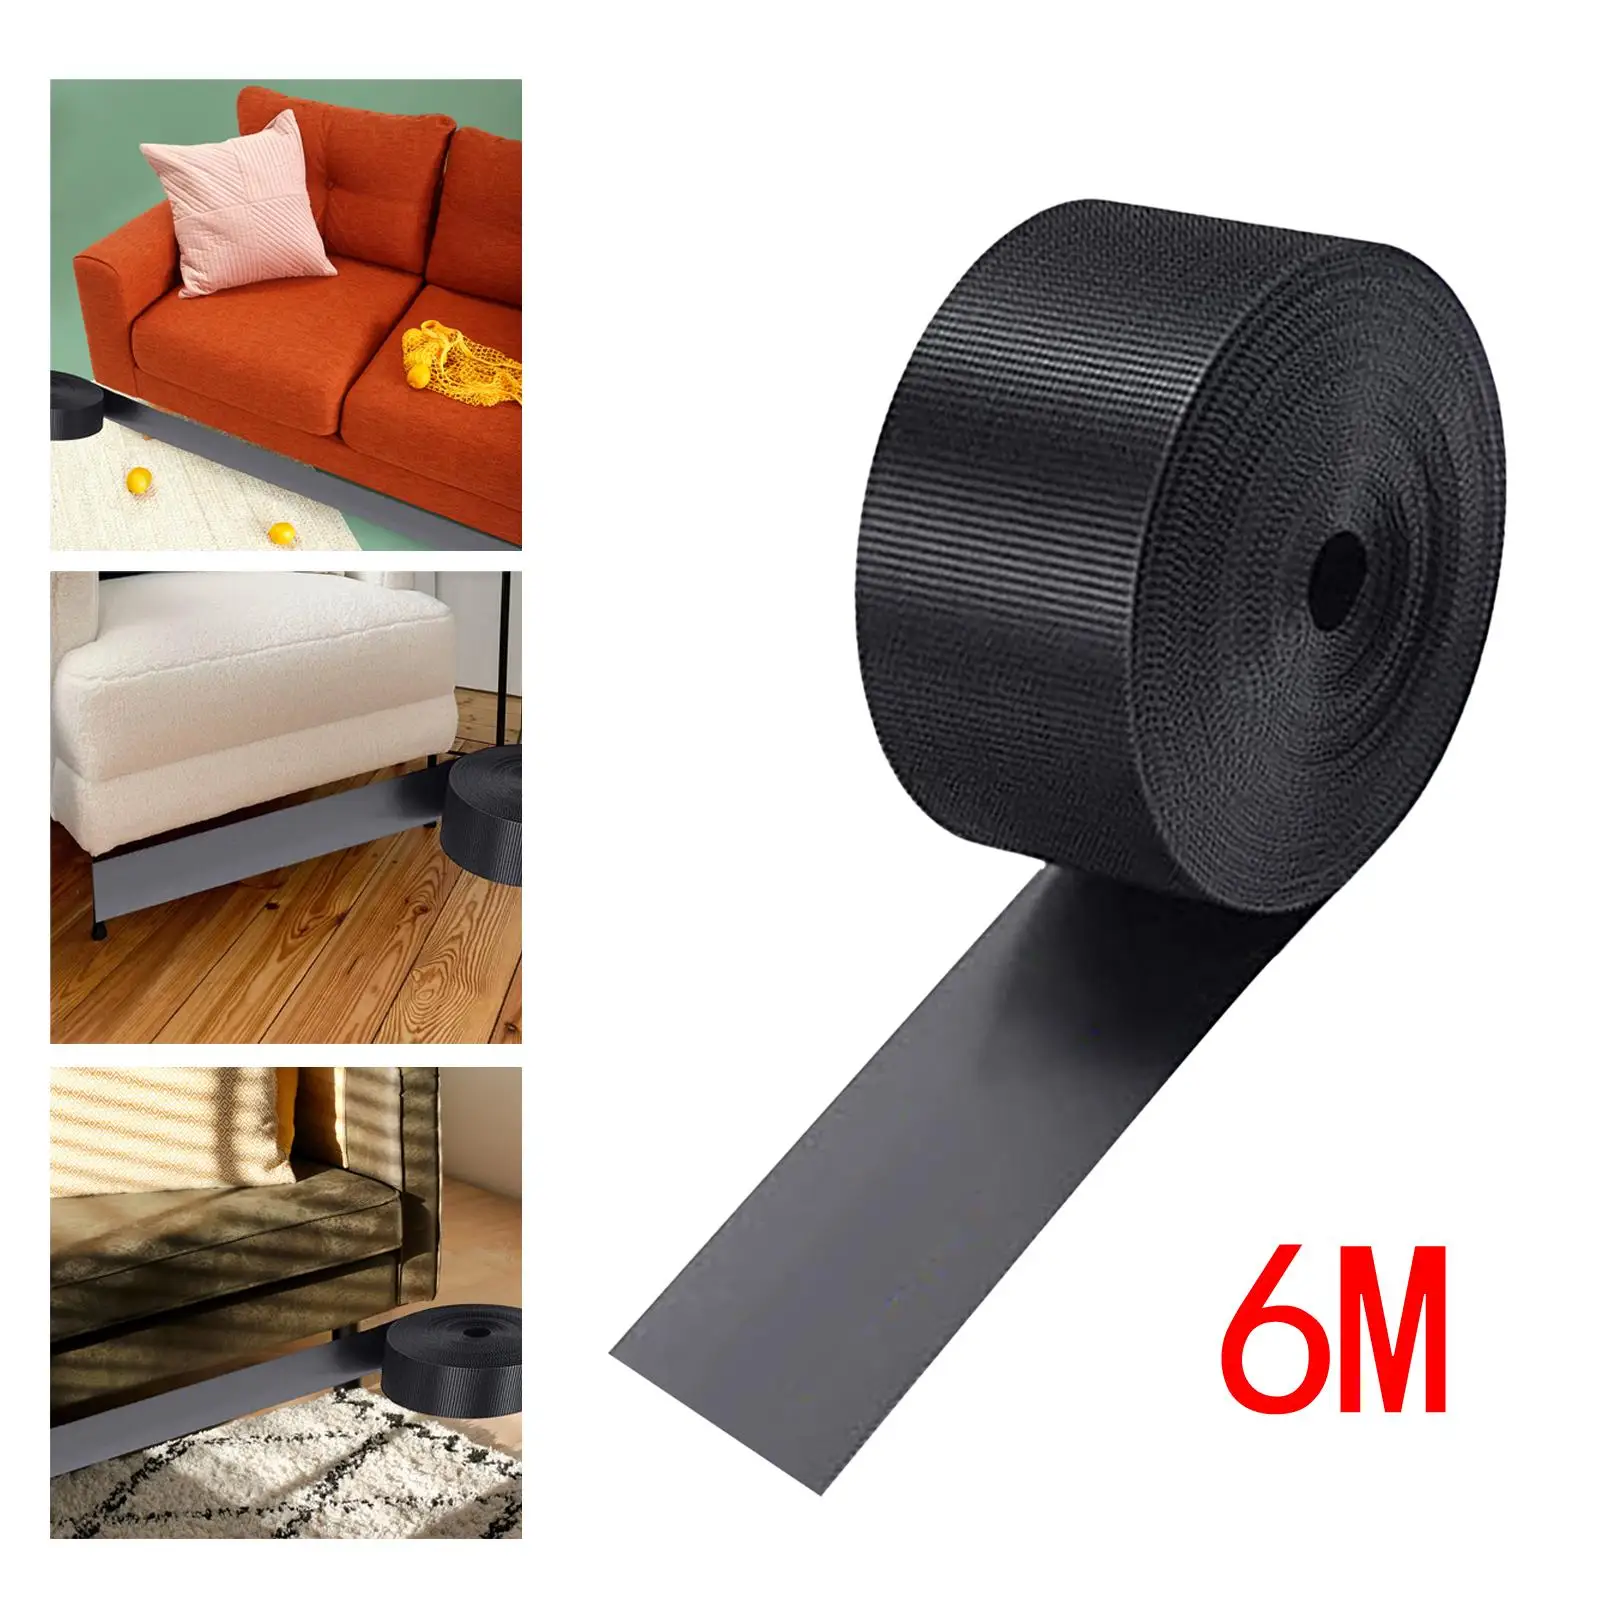 2 Pieces Under Sofa Toy Bumper Sectional Connector Gap Bumper Under Sofa Barrier for Home Bedroom Furniture Chairs Couch